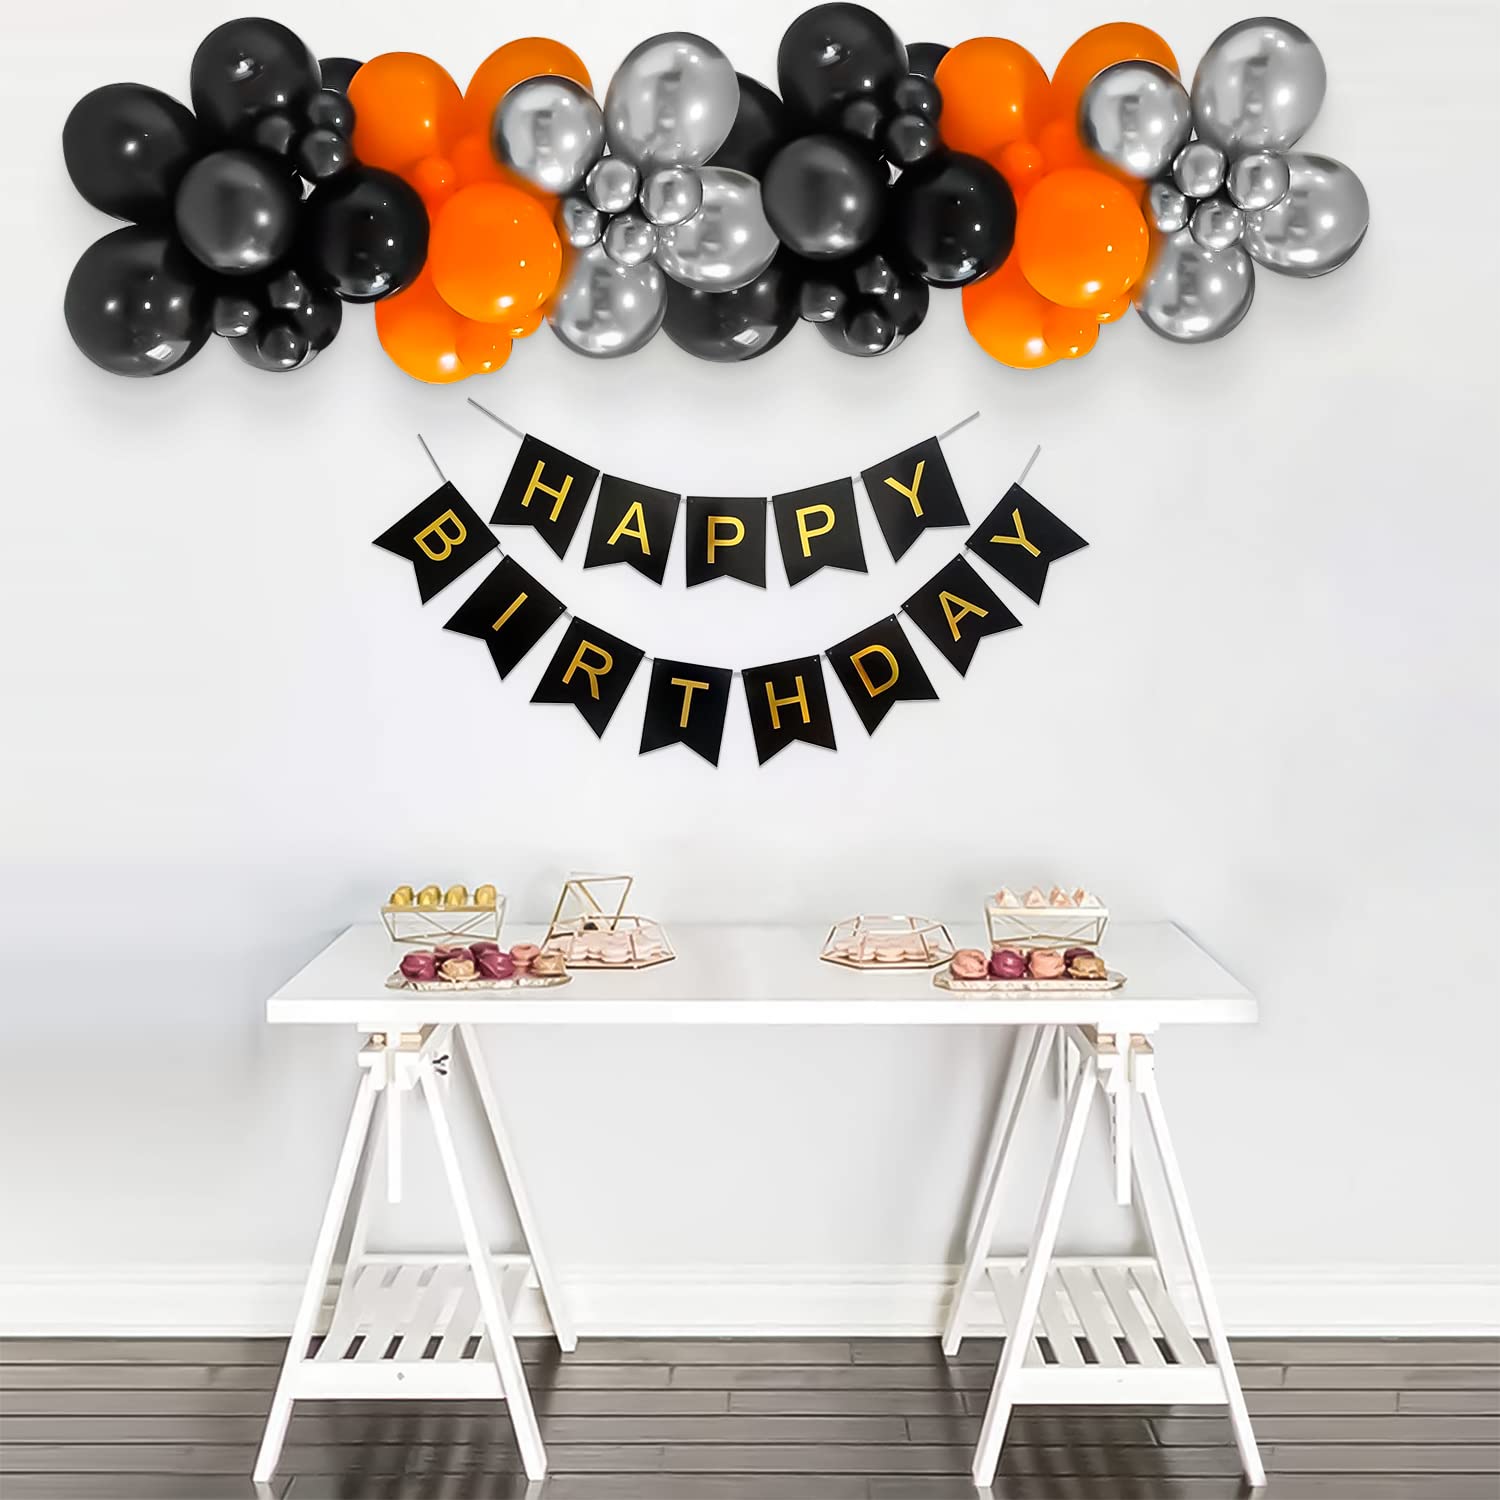 Happy Birthday combo with Silver, Gold, Orange Balloons- 28 Items